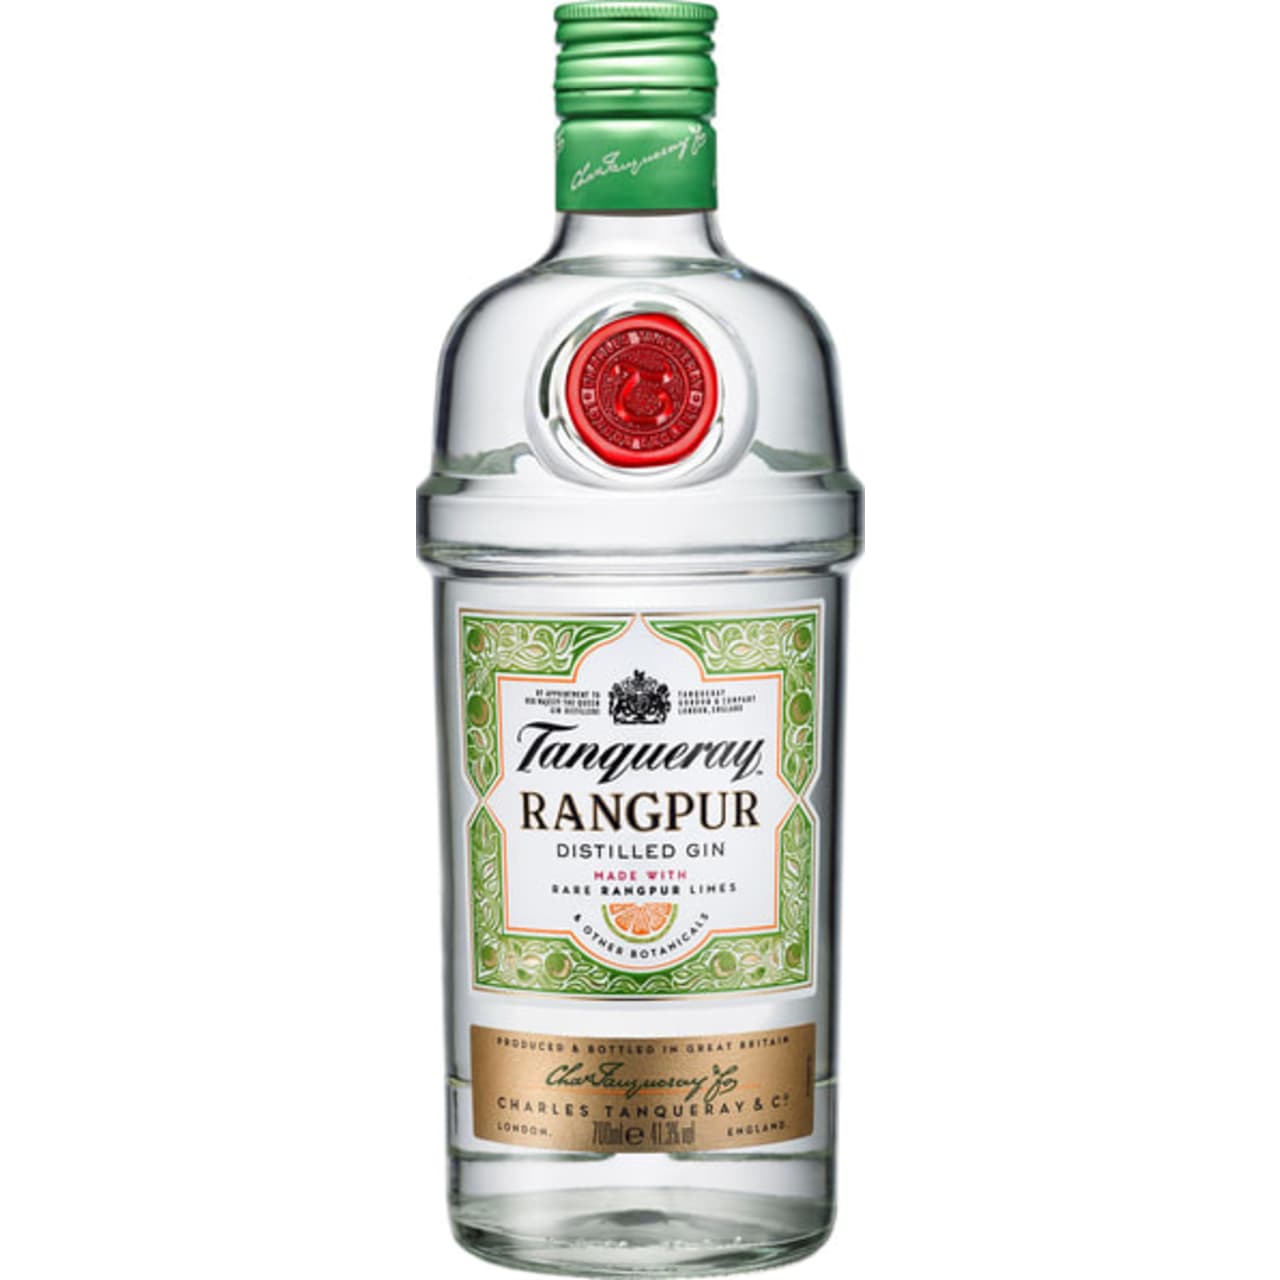 Distilled four times to remove any traces of neutral grain spirit and to allow the added flavours of a perfect balance of four classic gin botanicals - refreshing juniper, peppery coriander, aromatic angelica and sweet liquorice - to shine through. The result of adding rangpur, ginger and bay leaves to the original premium product is an easy-drinking gin with a citrus twist.